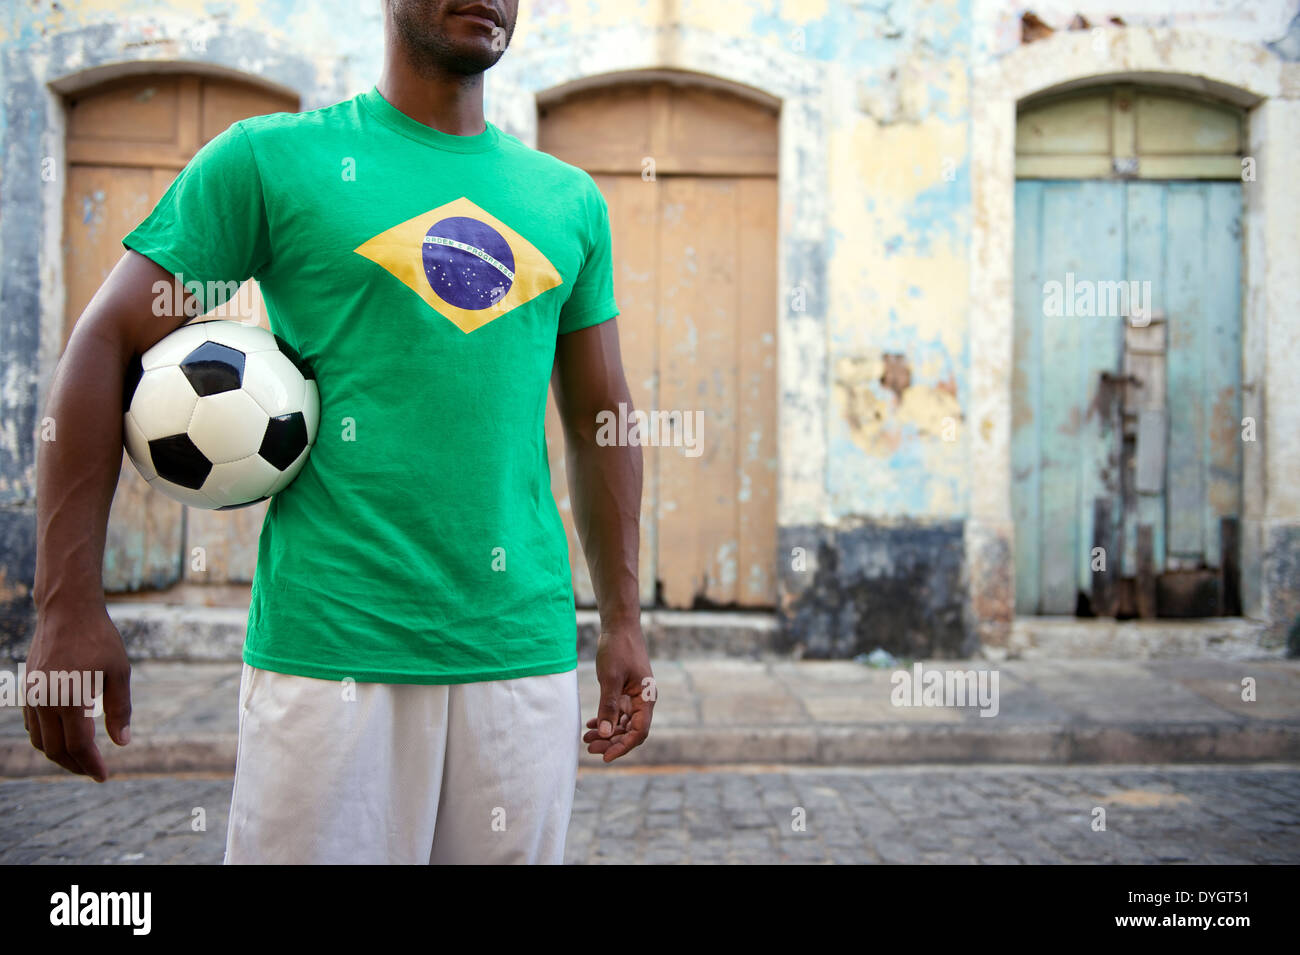 Brazilian football player stands holding soccer ball on an old rustic village street Stock Photo